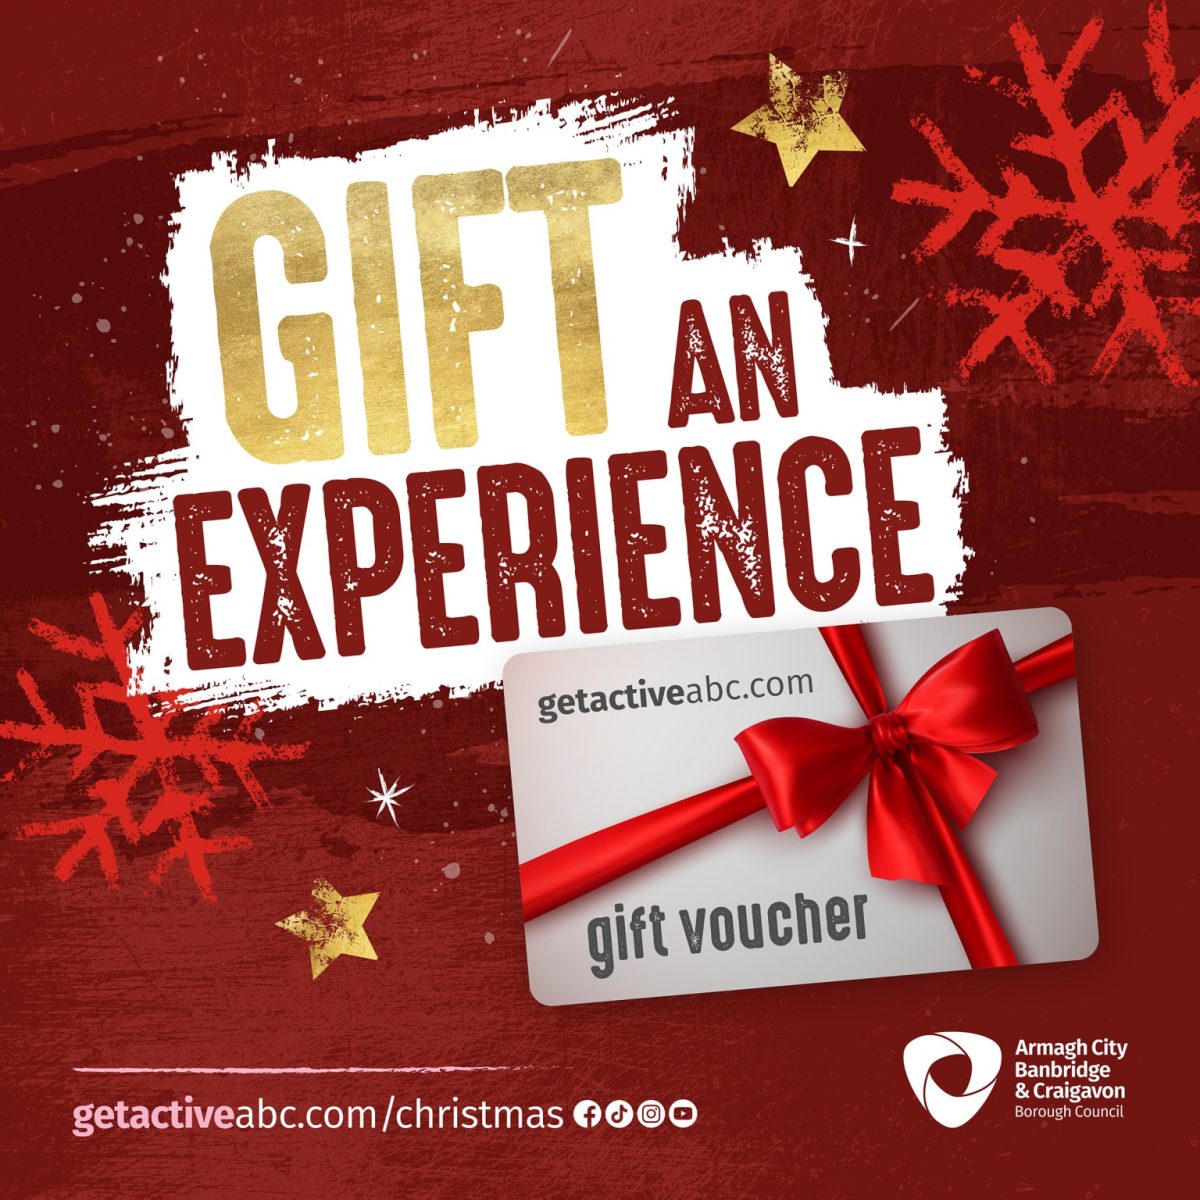 Getactiveabc gift vouchers are available!